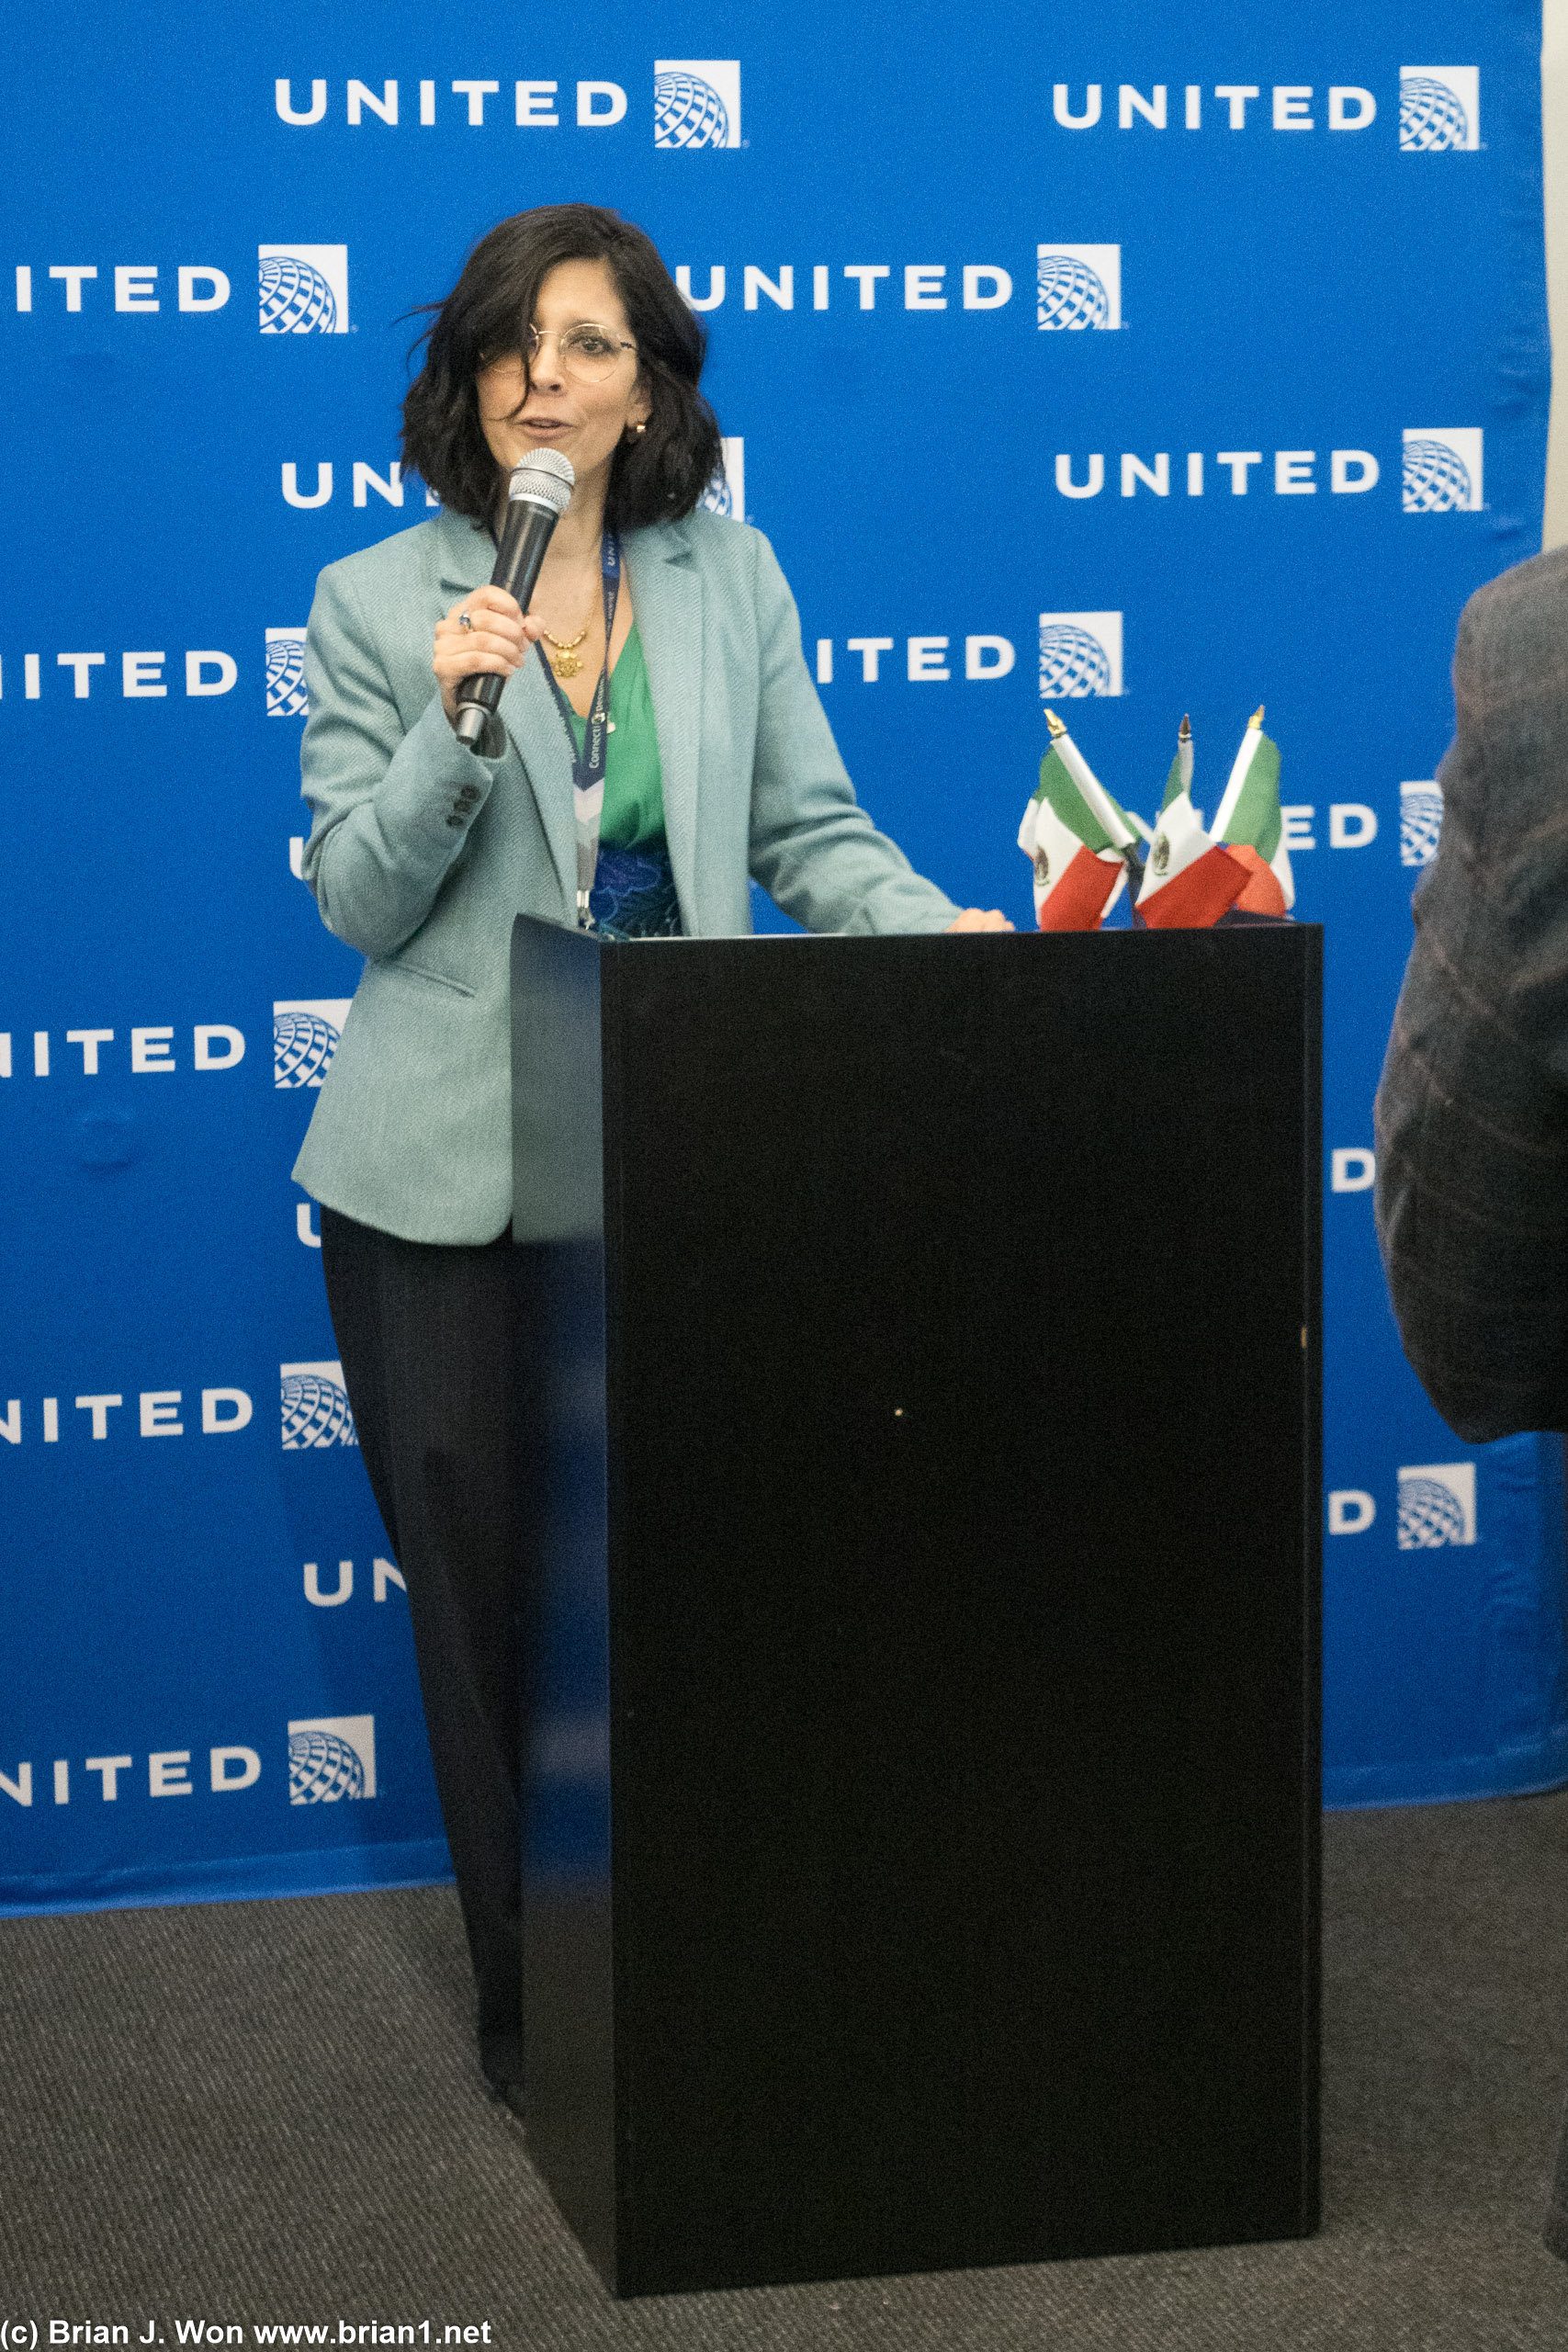 Paulina (sp?), customer service manager at LAX for United.